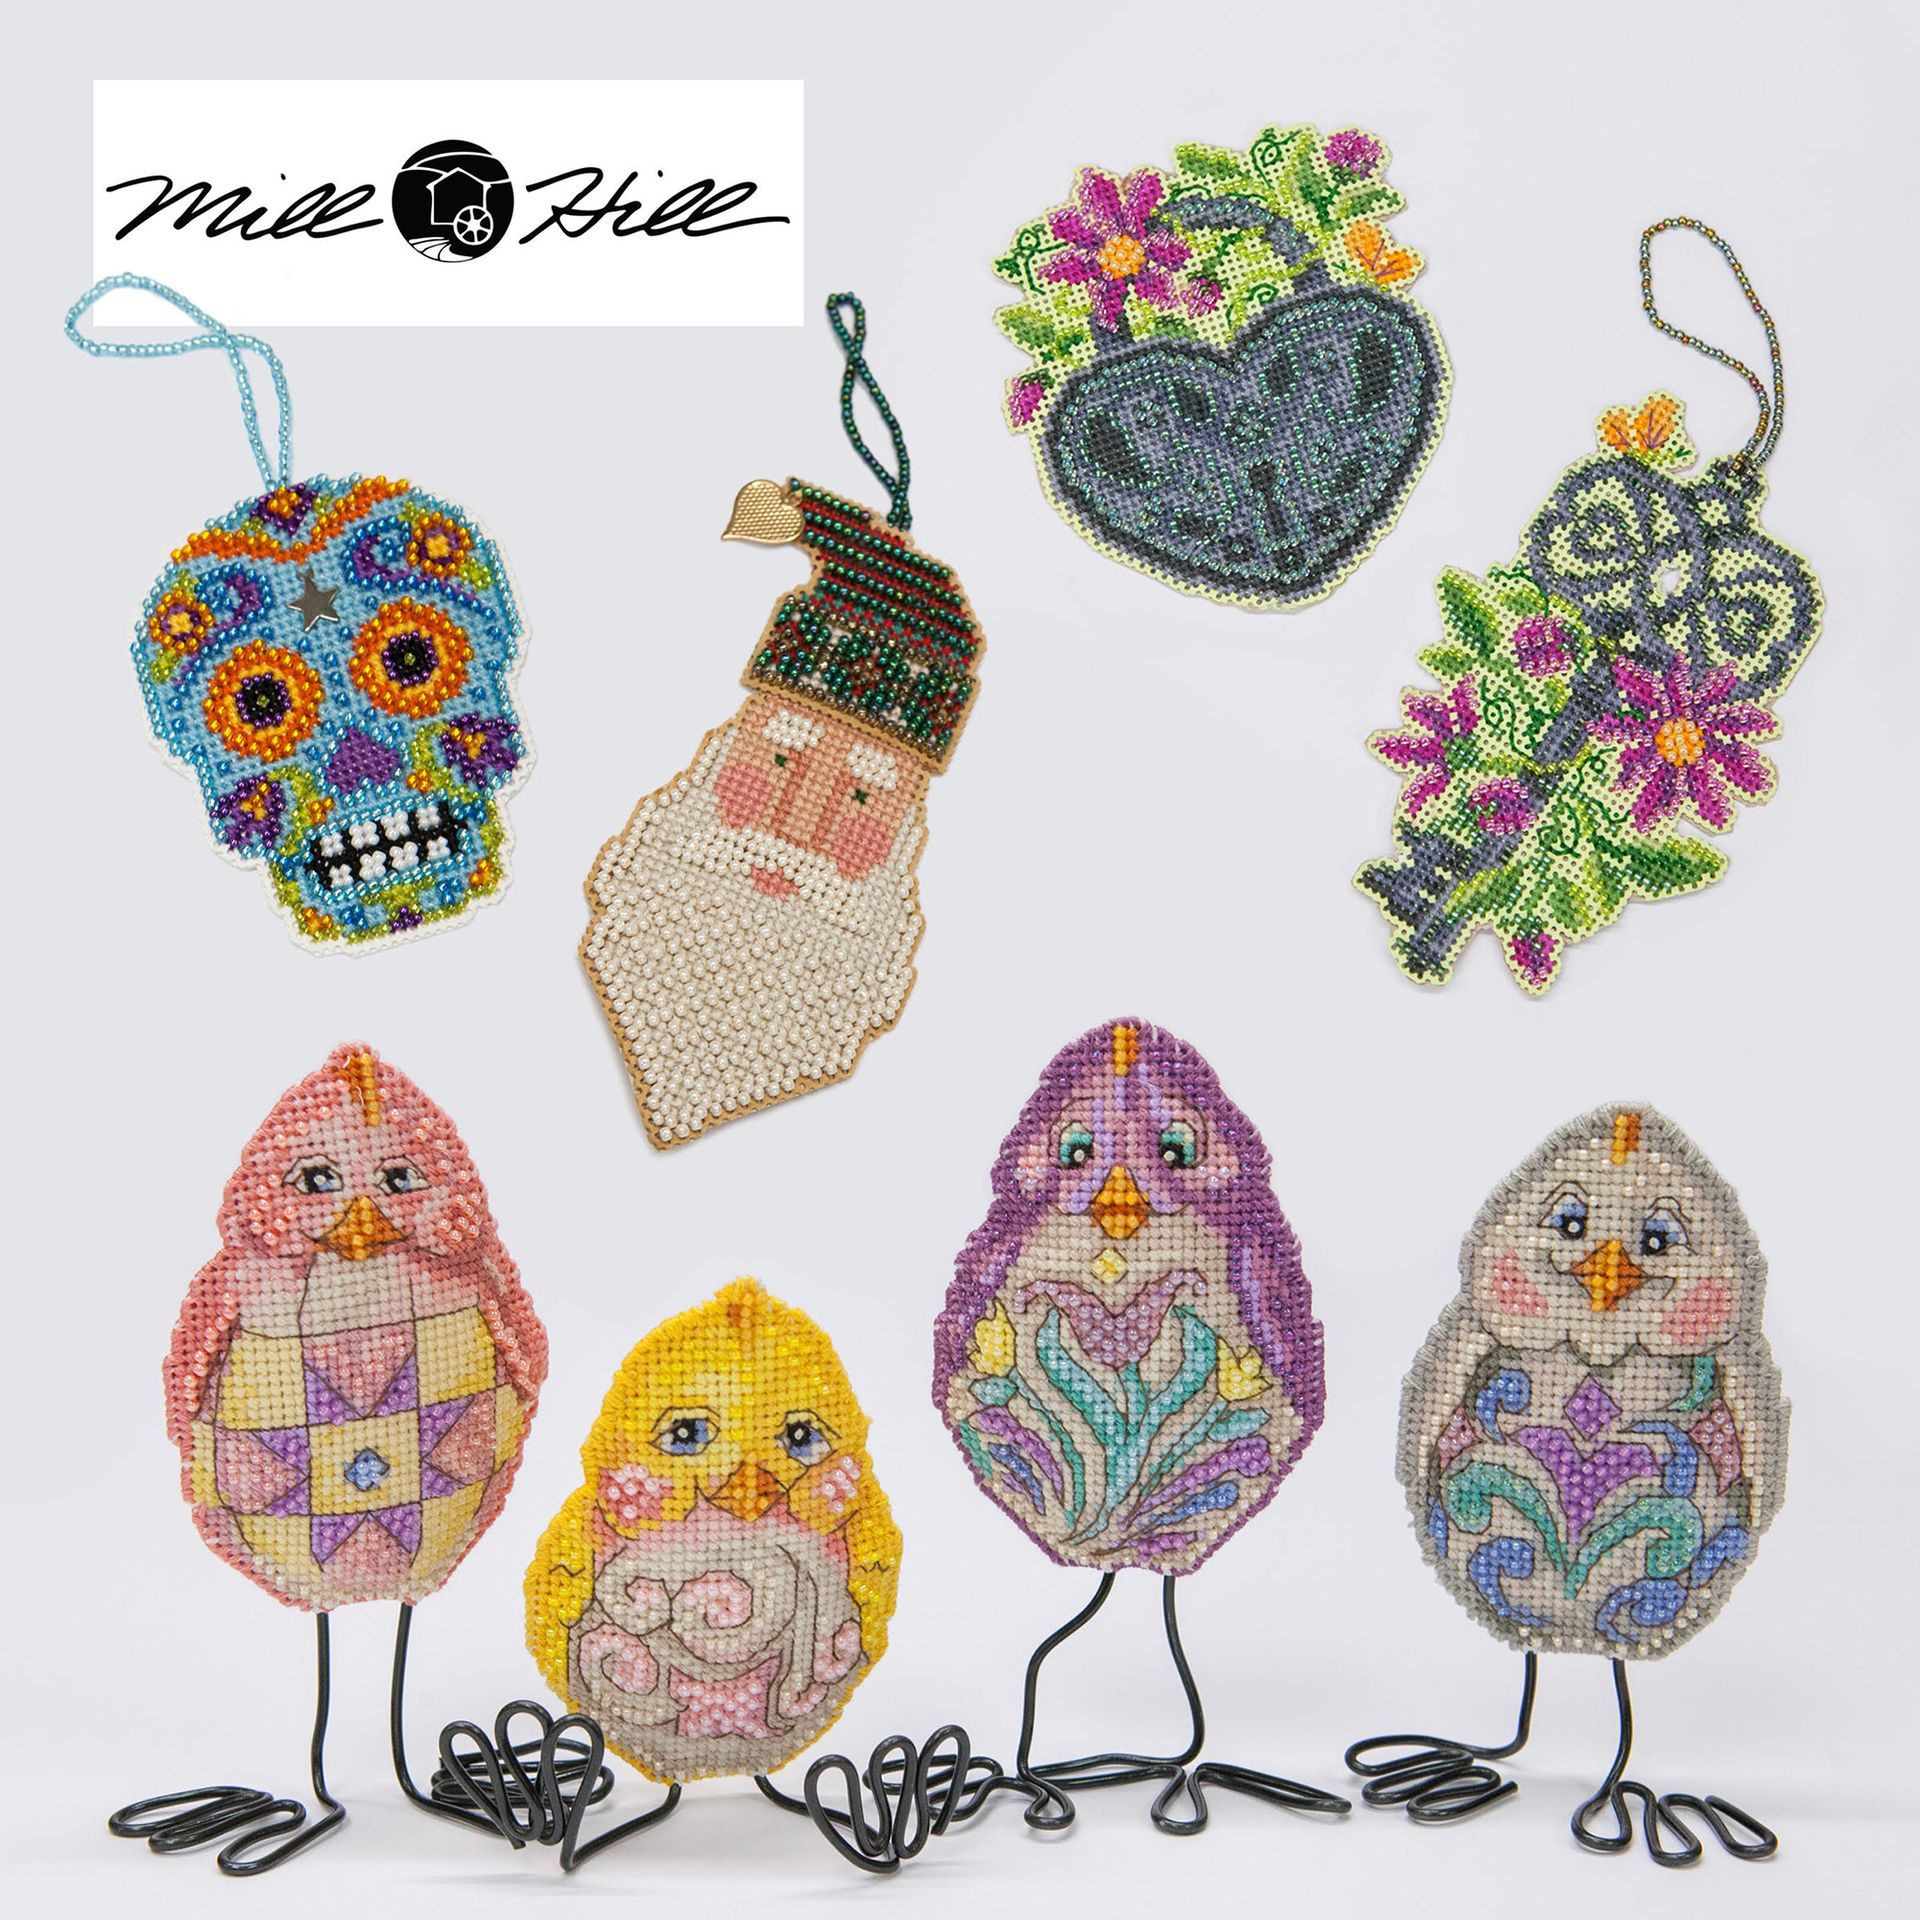 A collection of beaded ornaments from miss hill